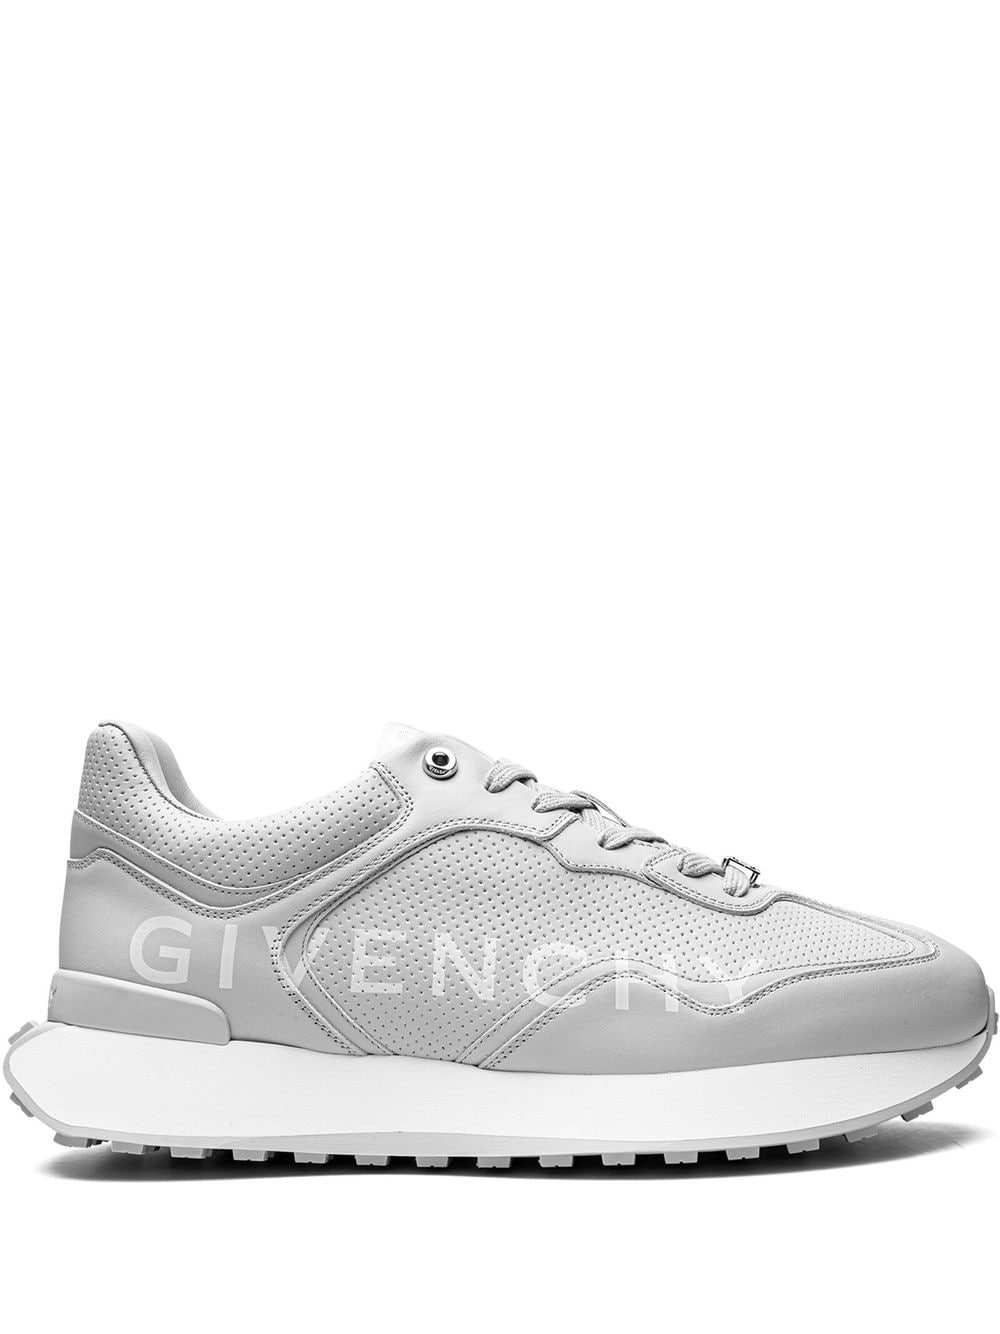 Givenchy GIV Runner low-top sneakers